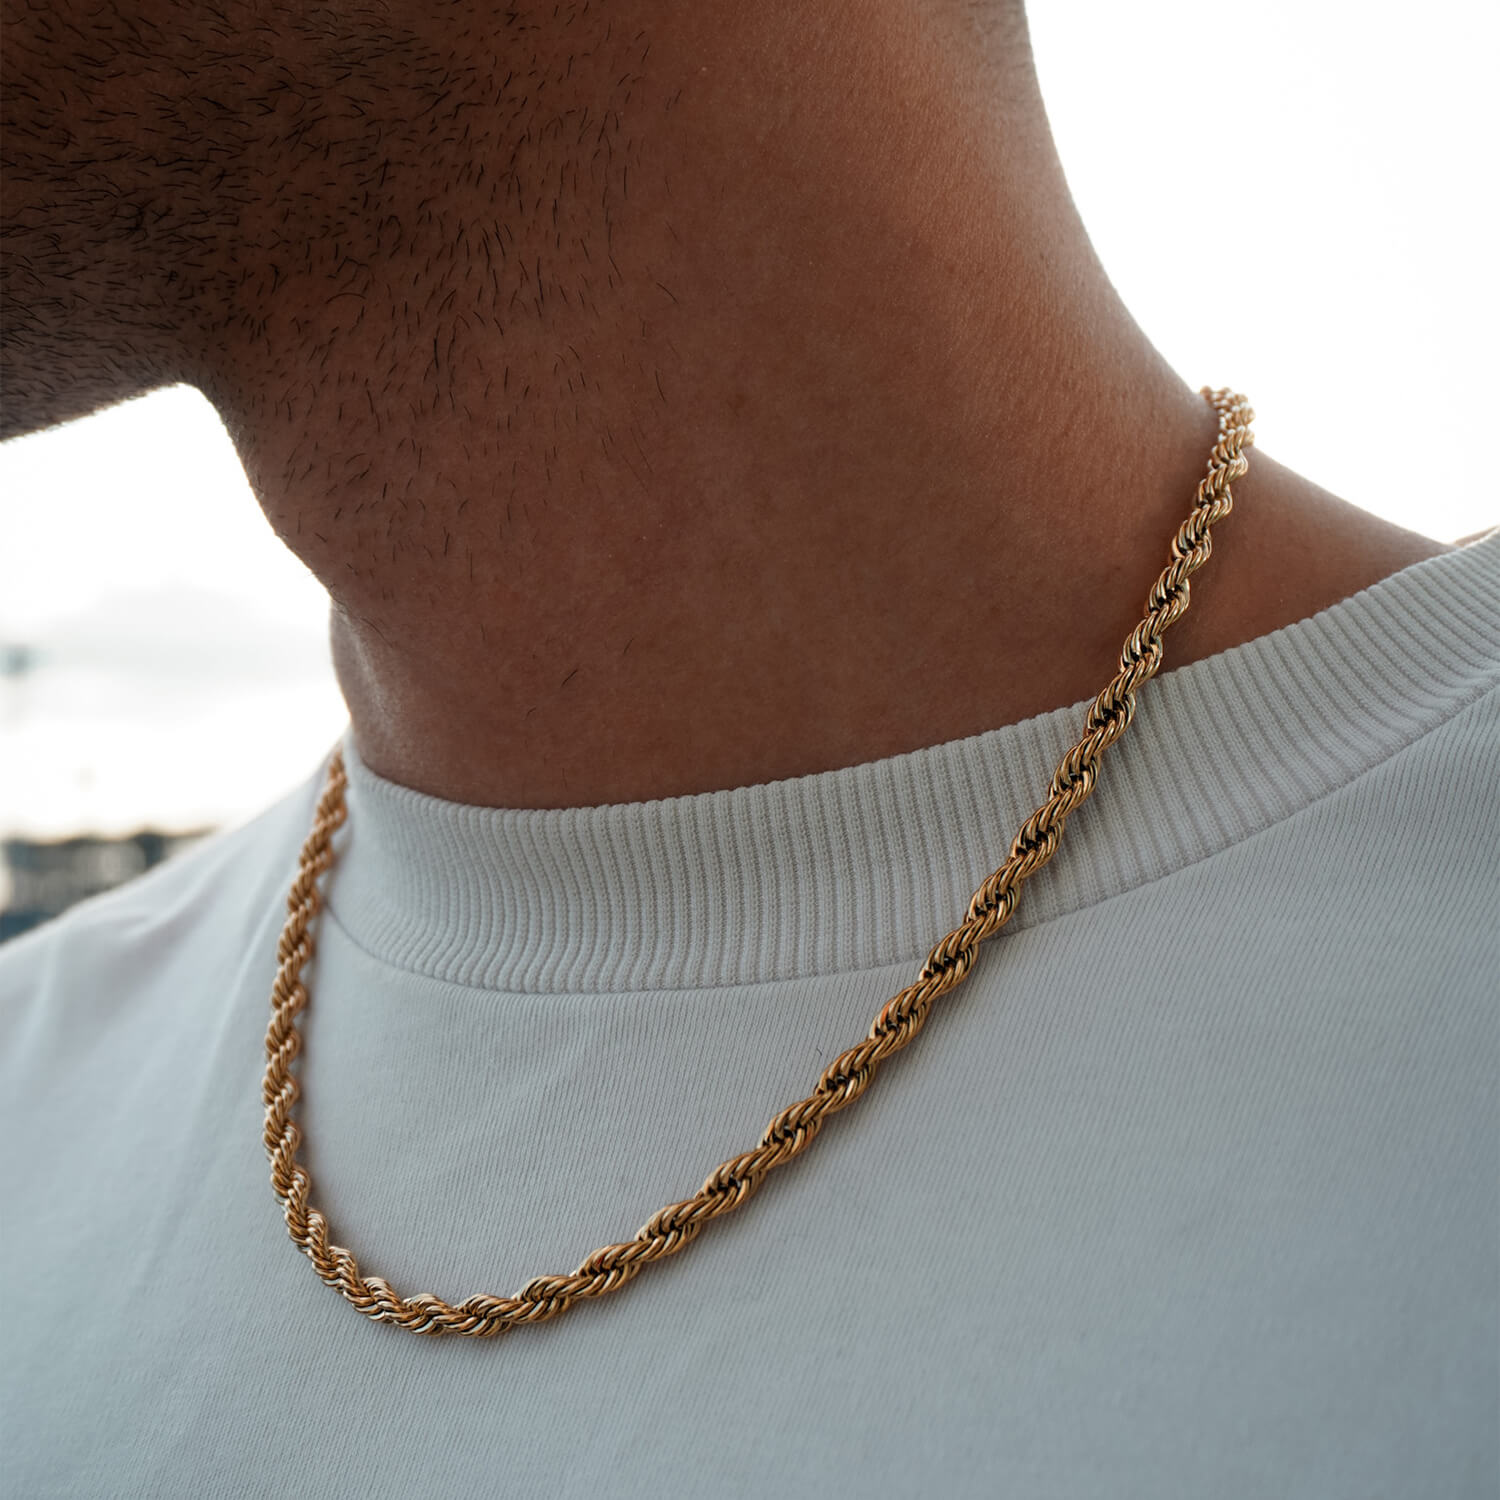 male wearing 5mm gold rope chain on neck